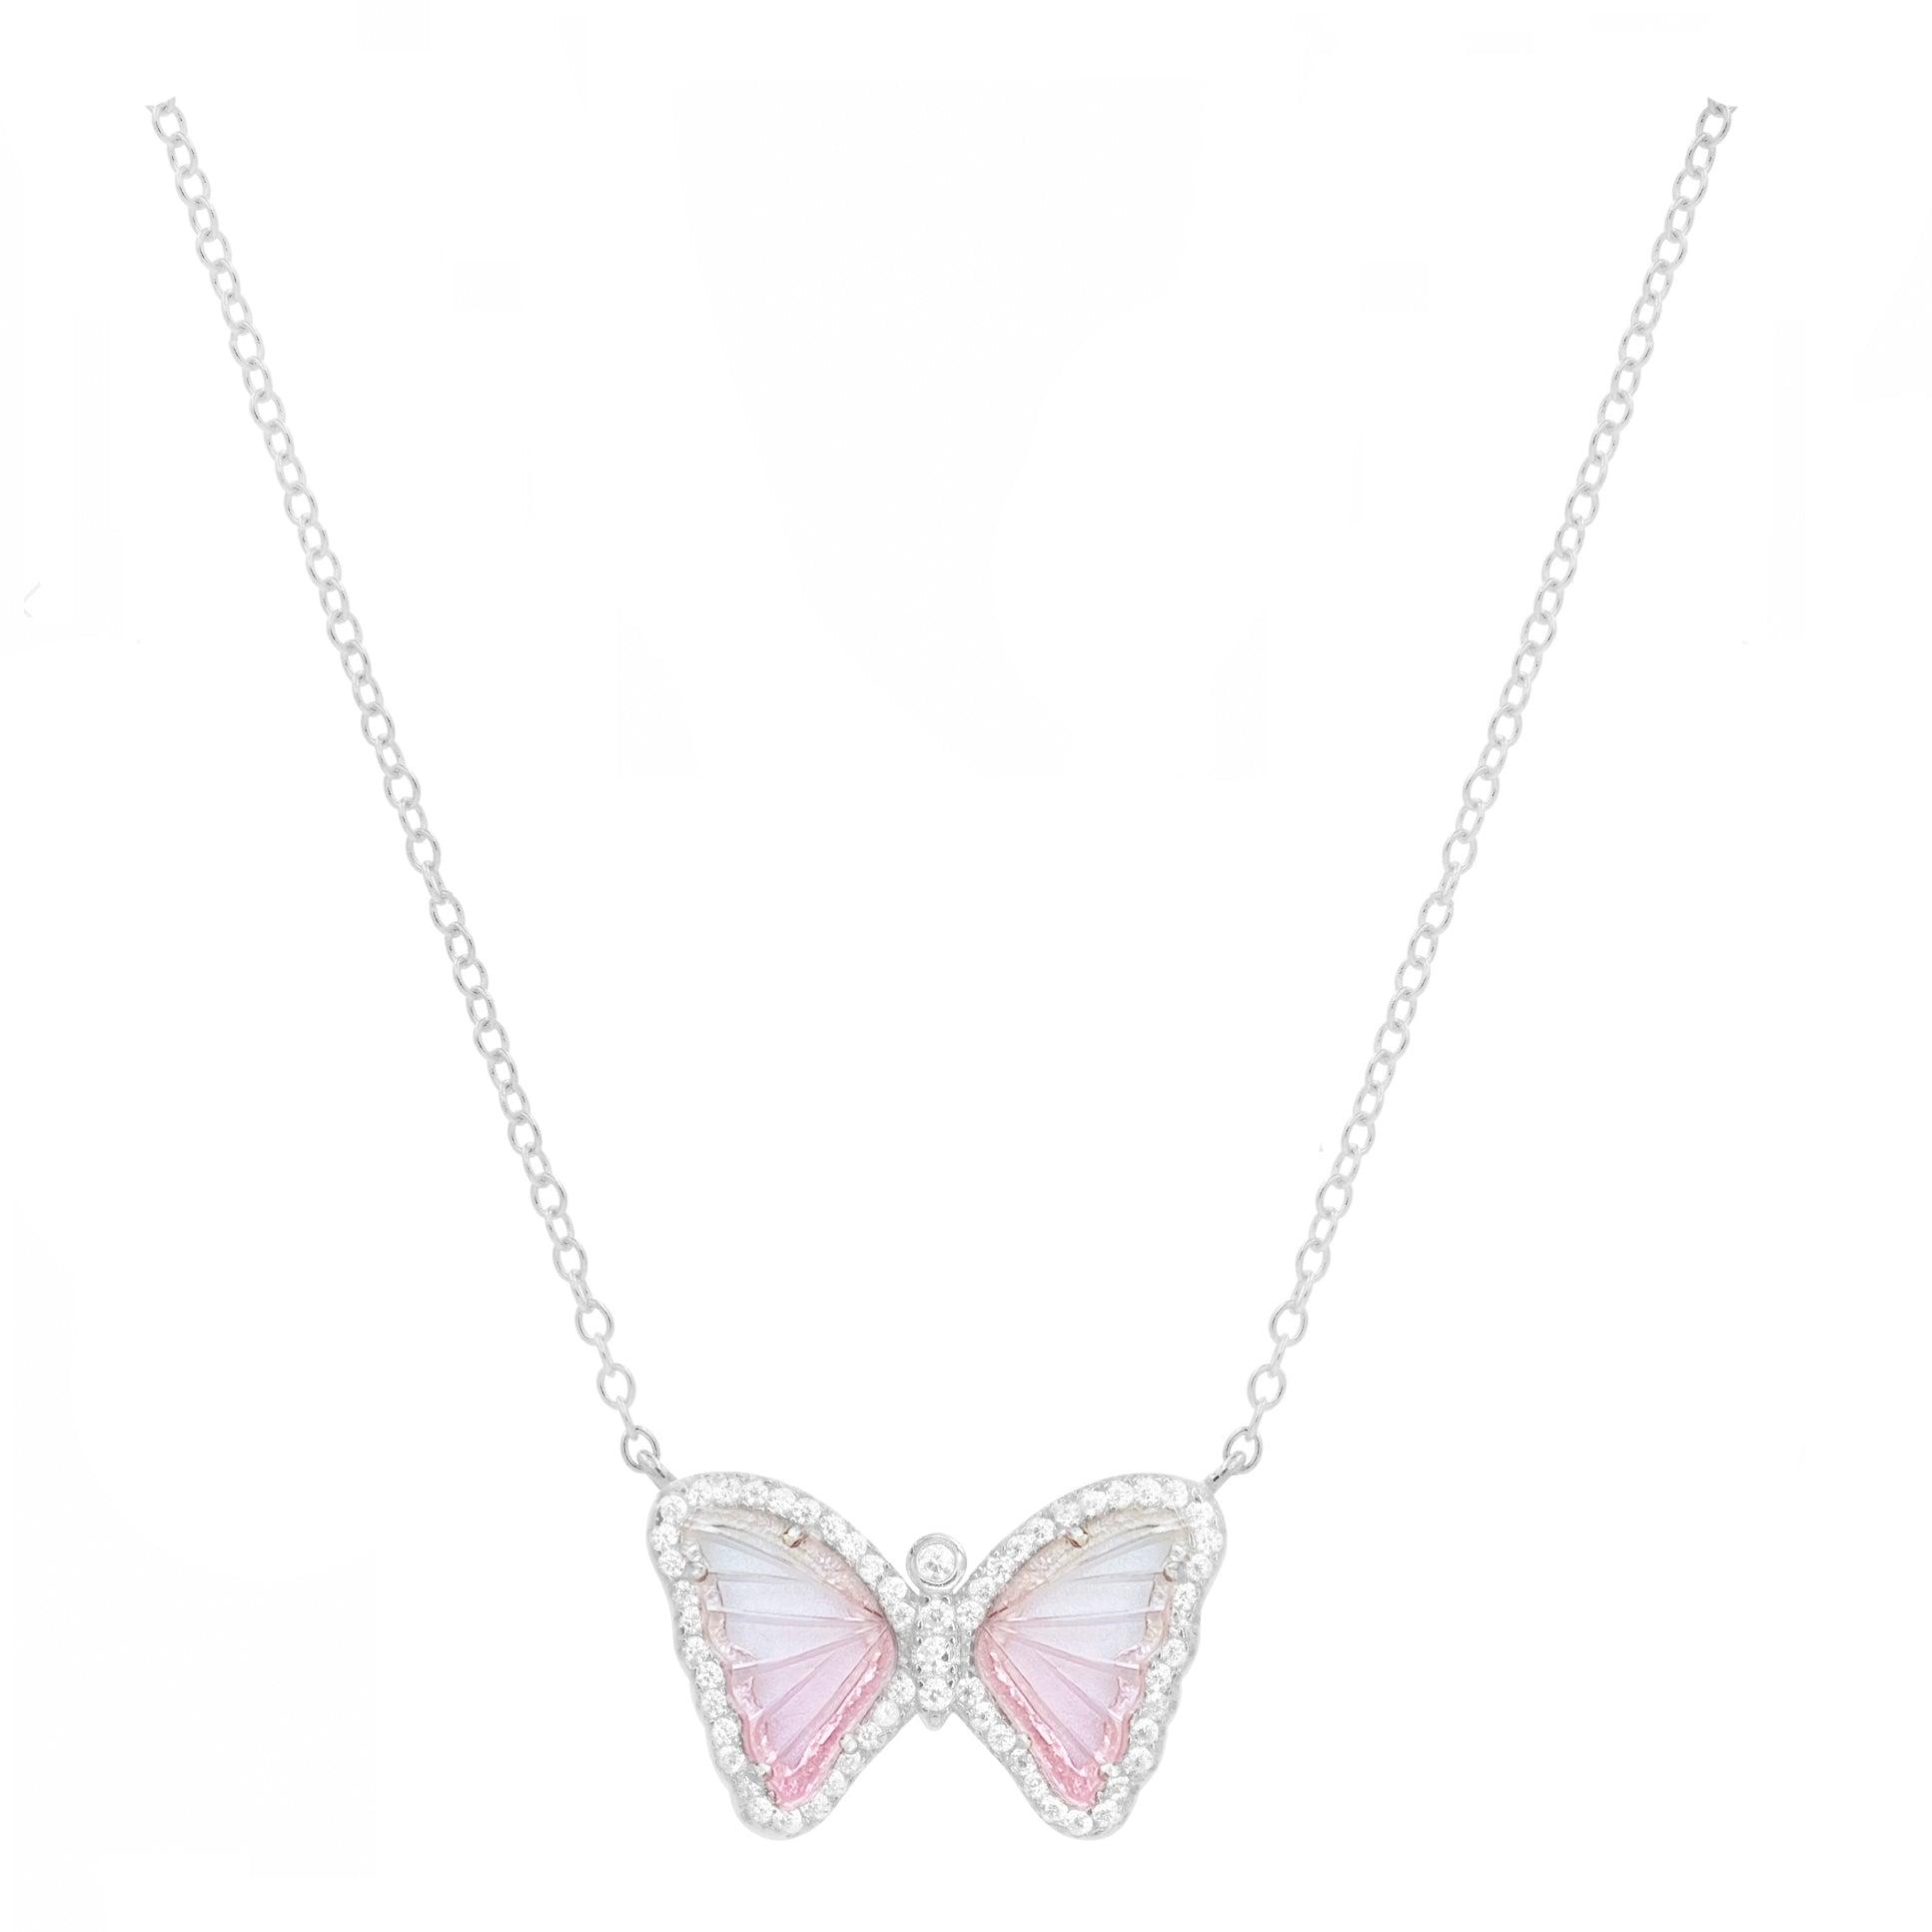 Cherry Blossom Butterfly Necklace